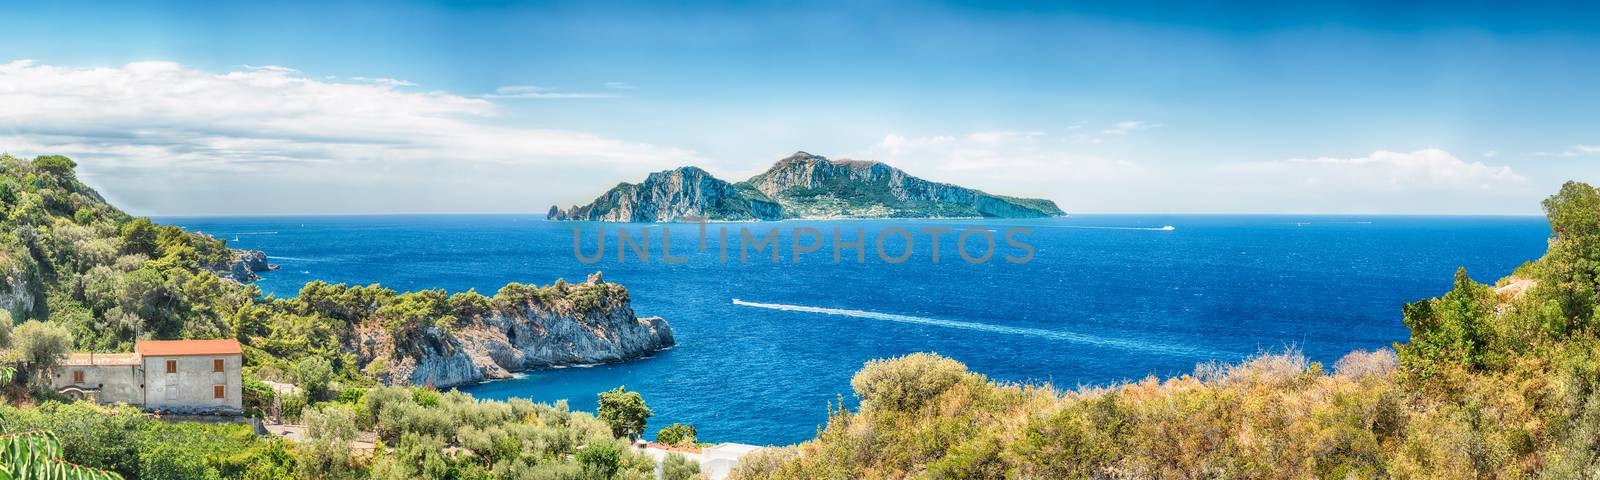 Panoramic aerial view of the Island of Capri, Italy, as seen from the town of Massa Lubrense